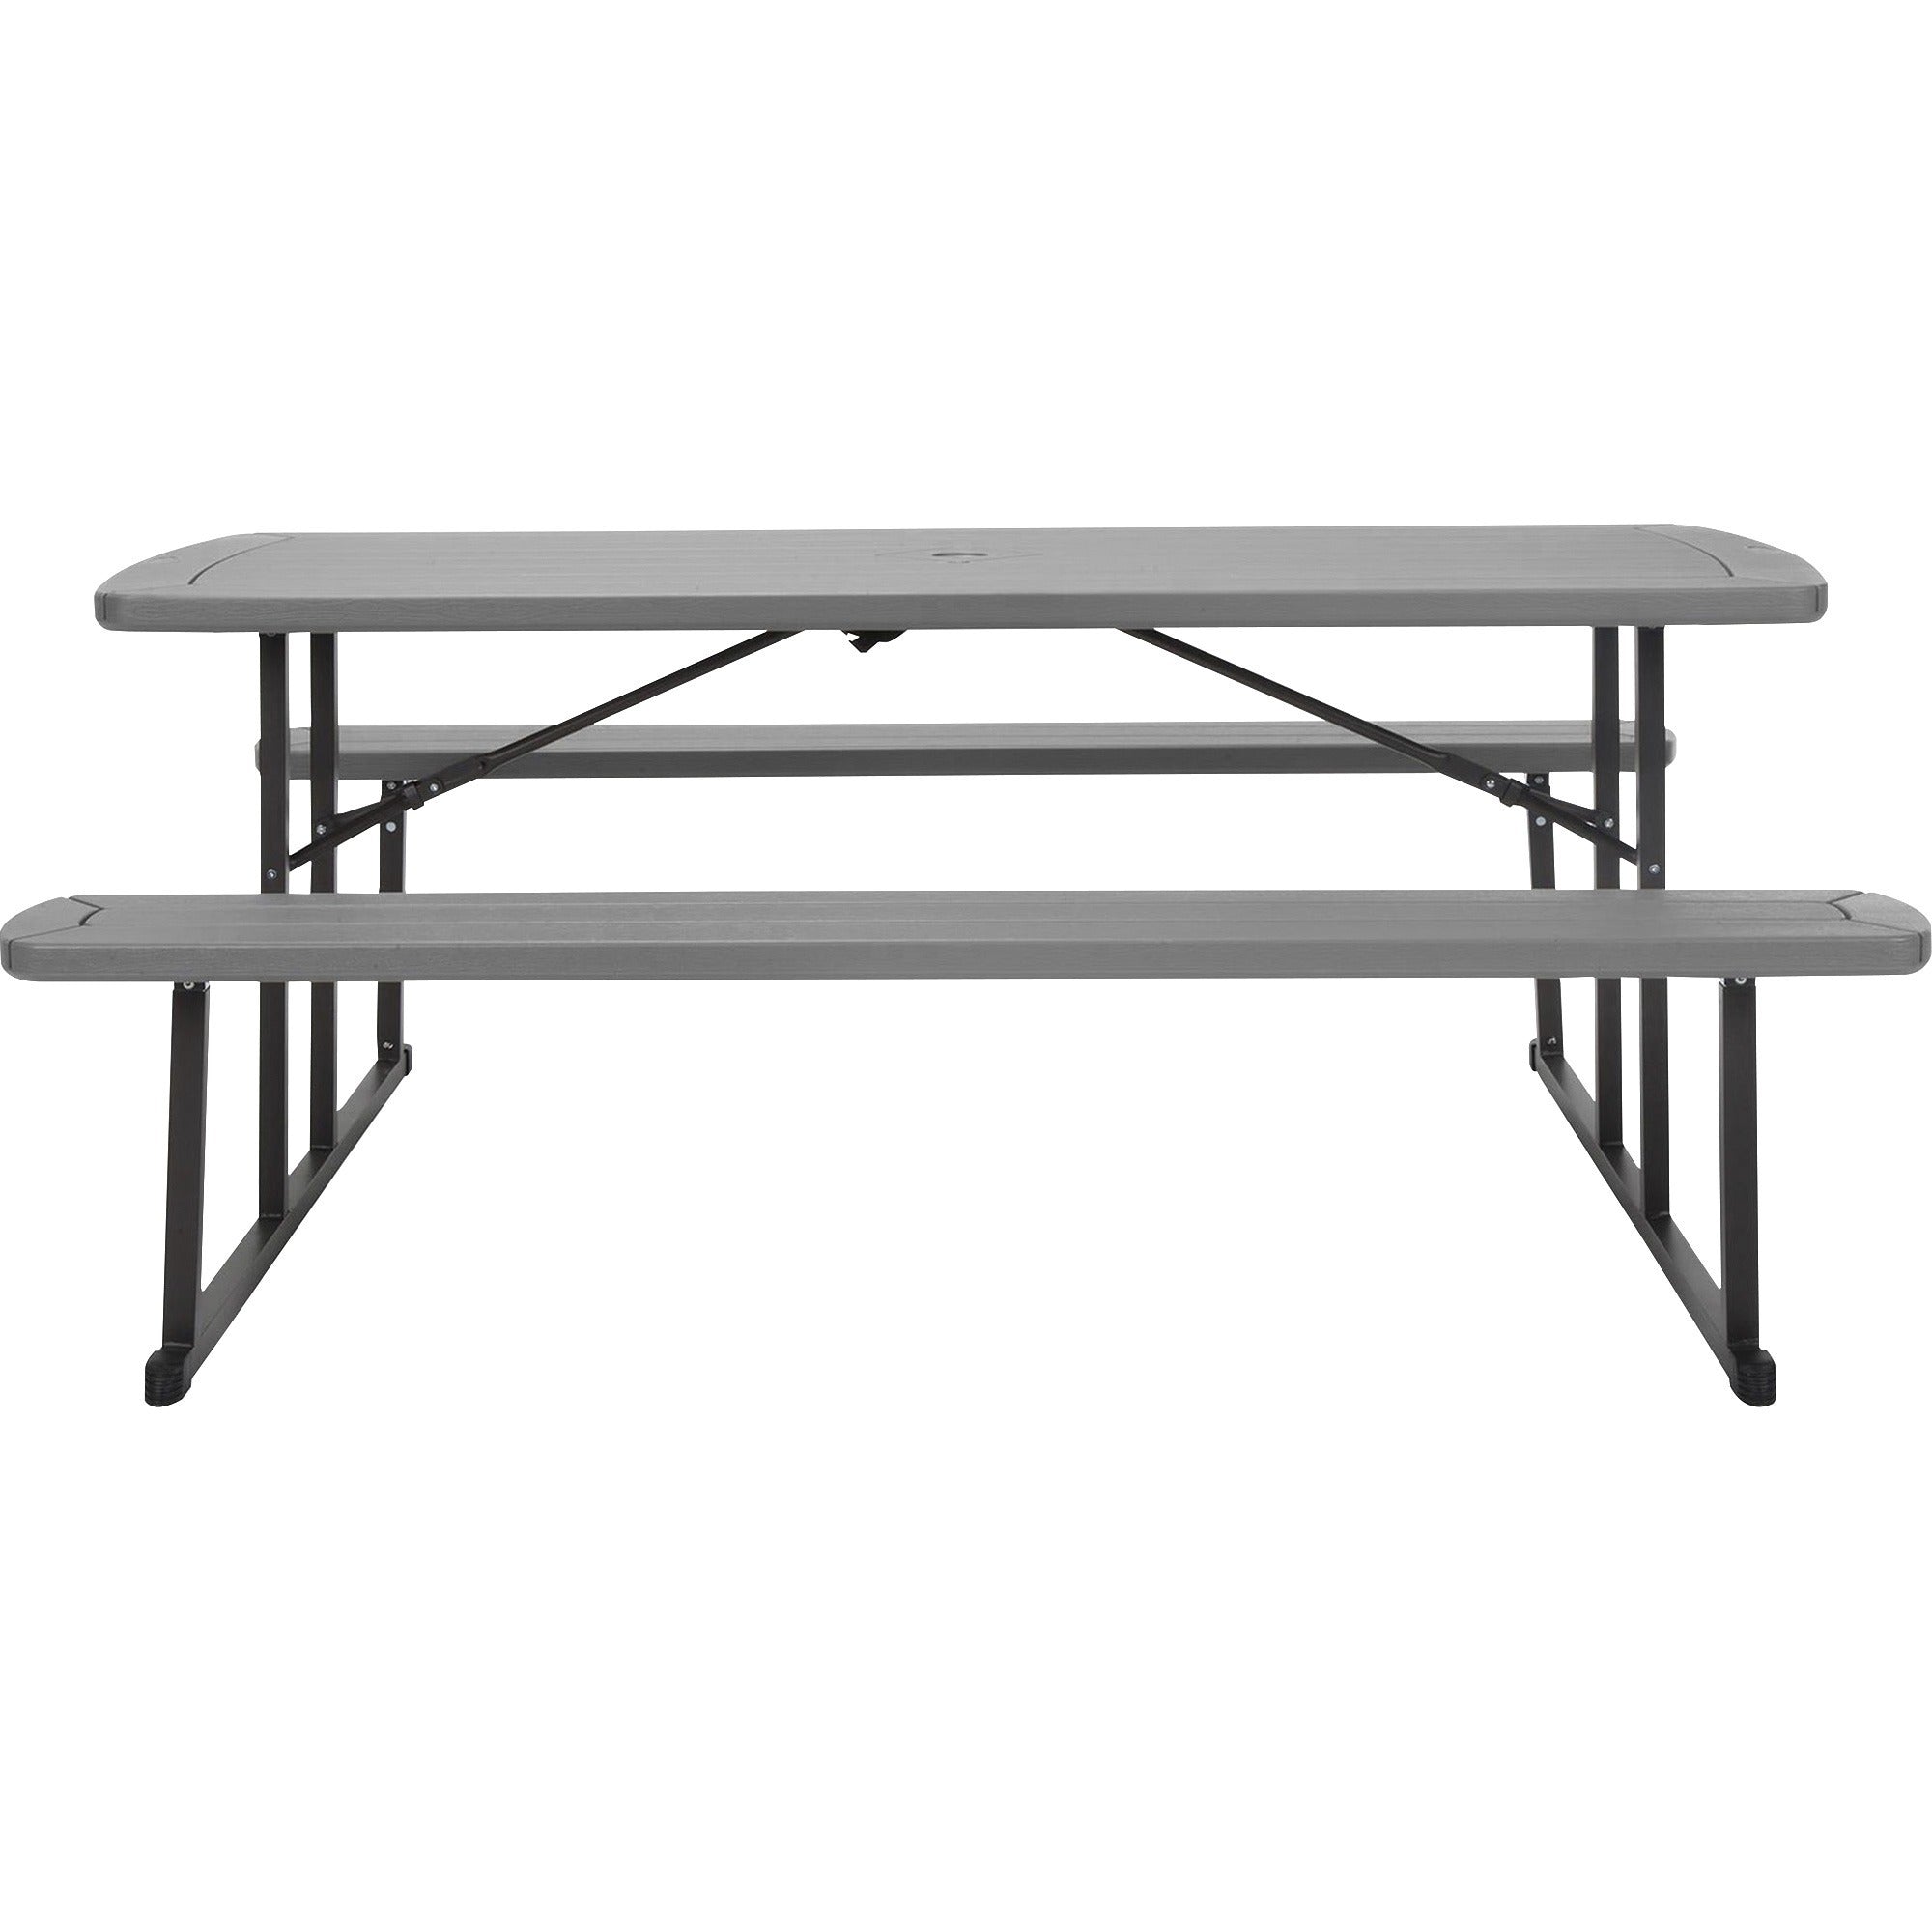 cosco-folding-picnic-table-for-table-toptaupe-top-800-lb-capacity-x-72-table-top-width-x-57-table-top-depth-29-height-wood-grain-resin-top-material-1-each_csc87902dgr1e - 4